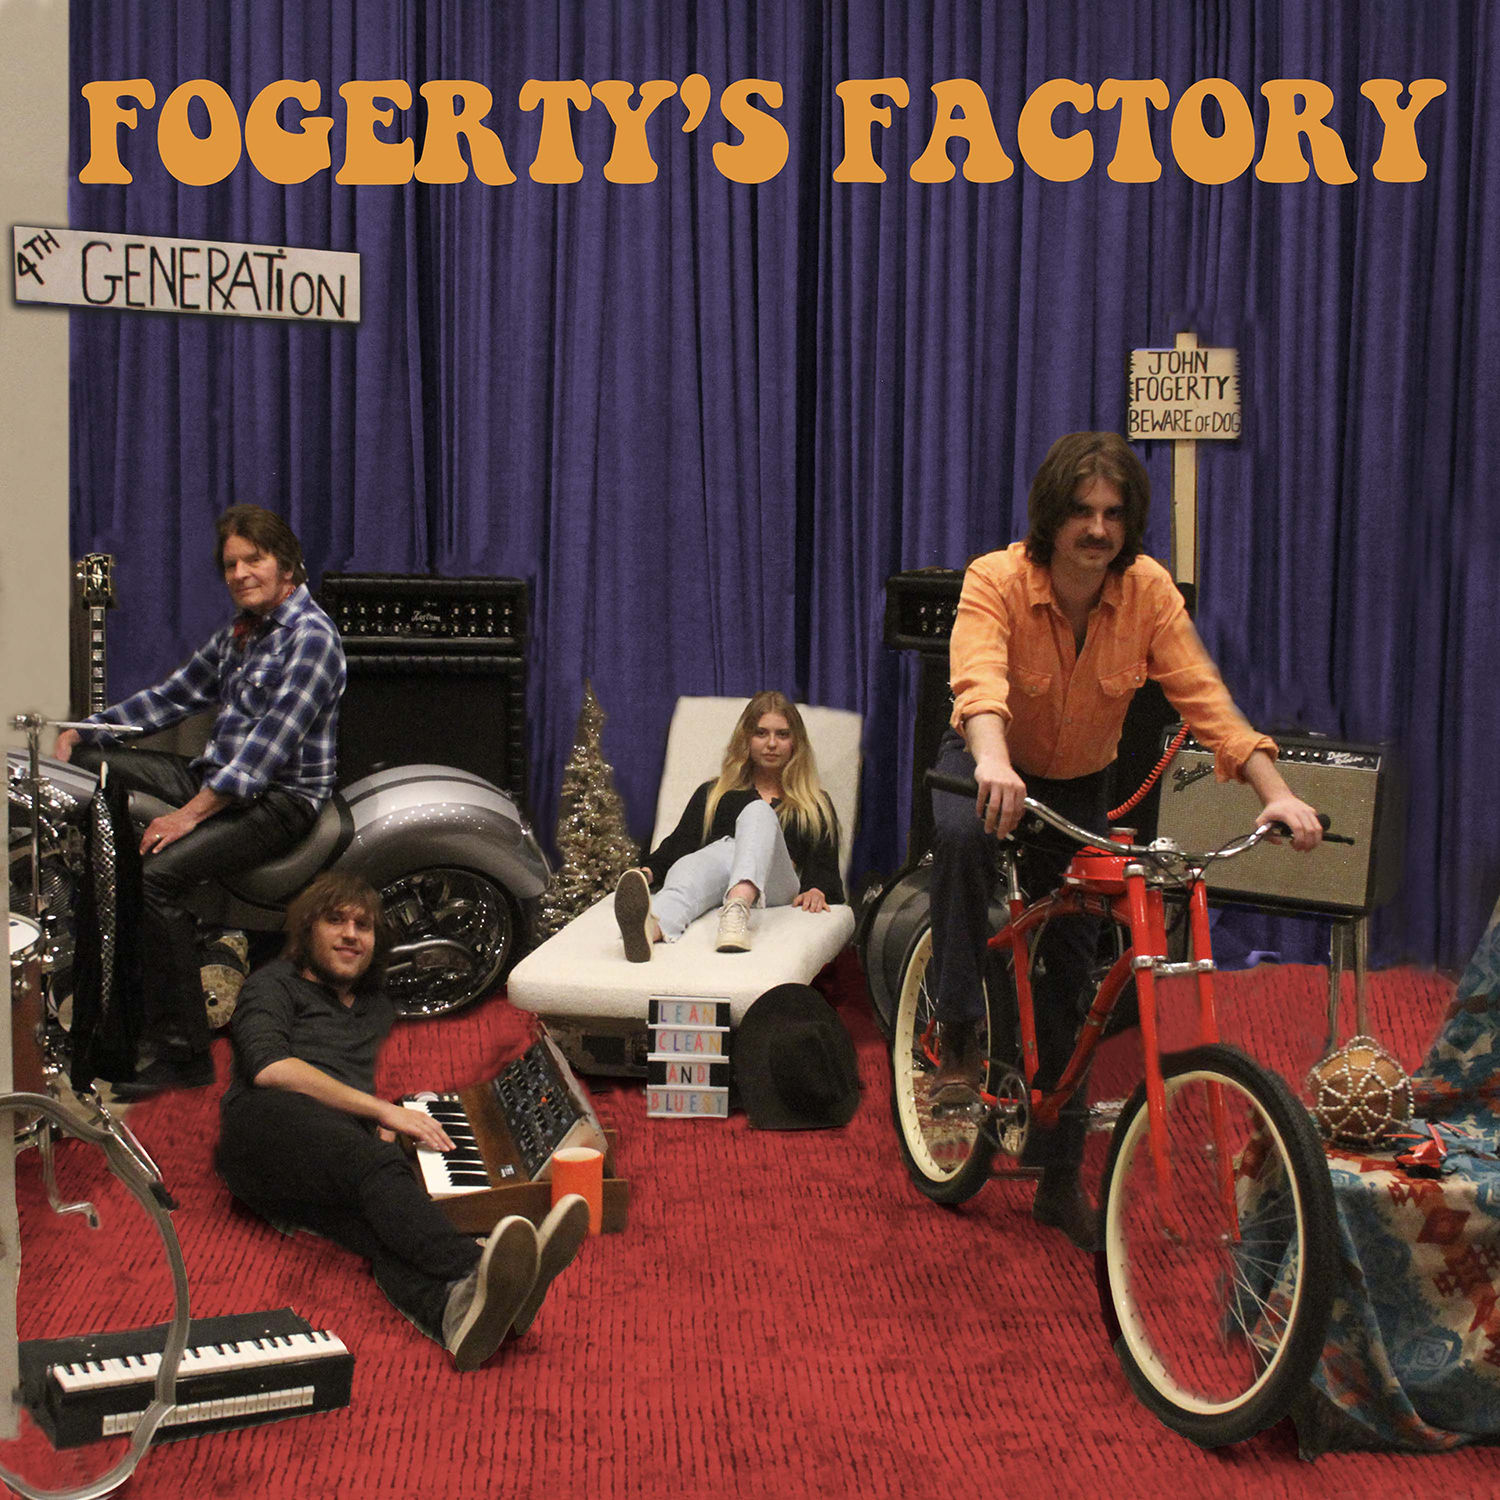 John Fogerty - Fogerty's Factory ExpEd [2020] 24-88.2